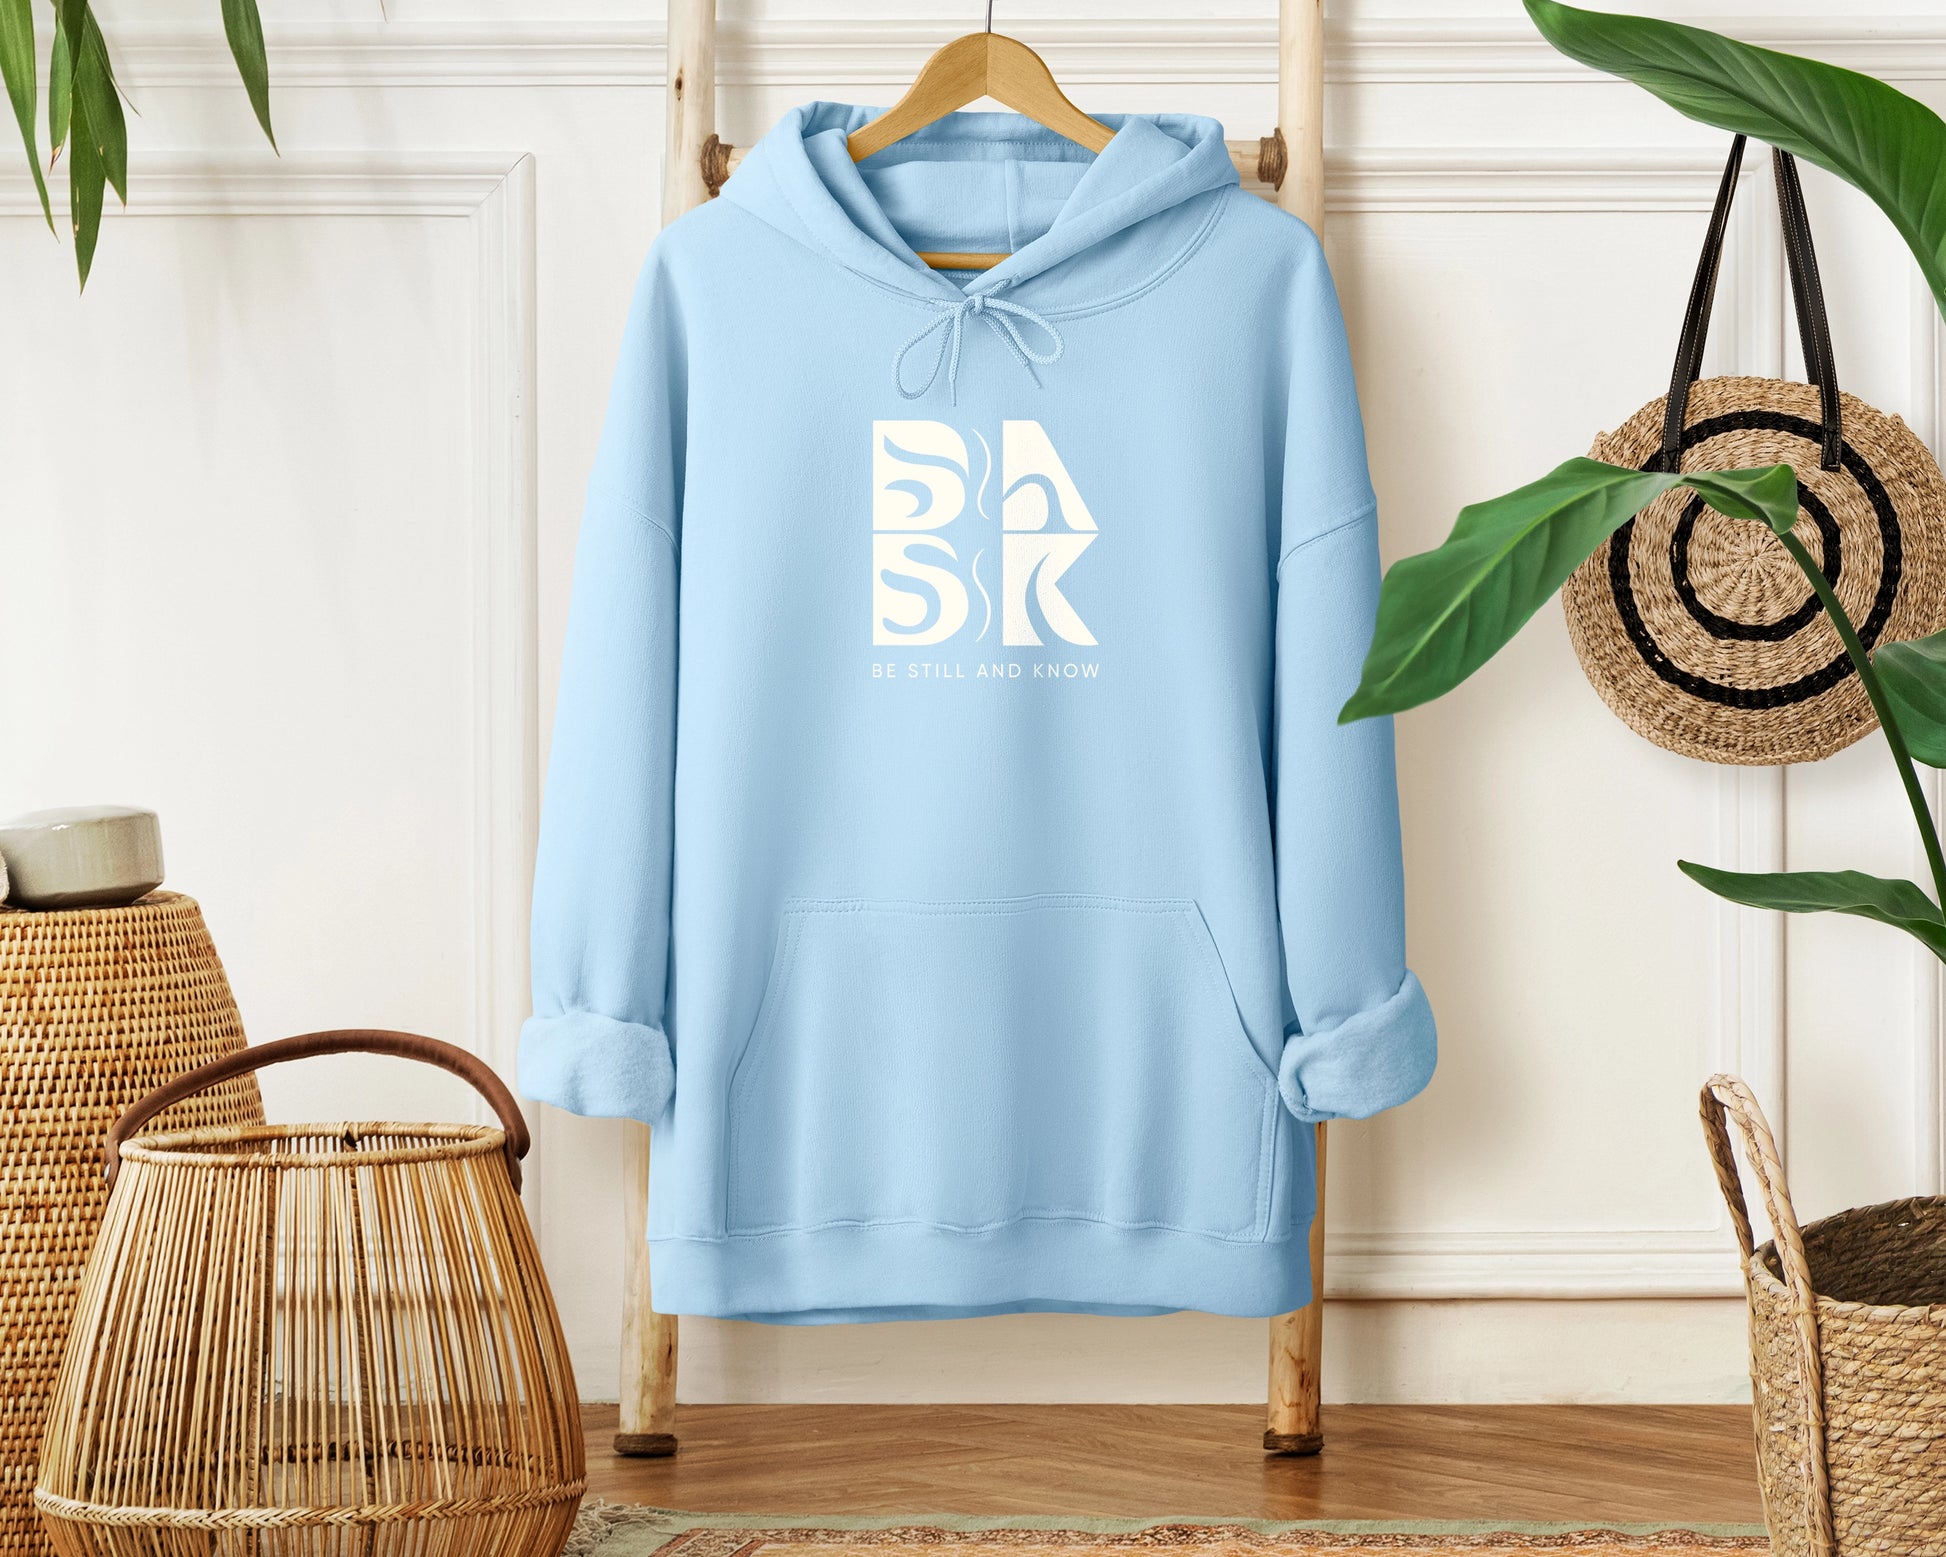 A Coastal Calm Hoodie in Light Blue with the Be Still and Know logo on it.